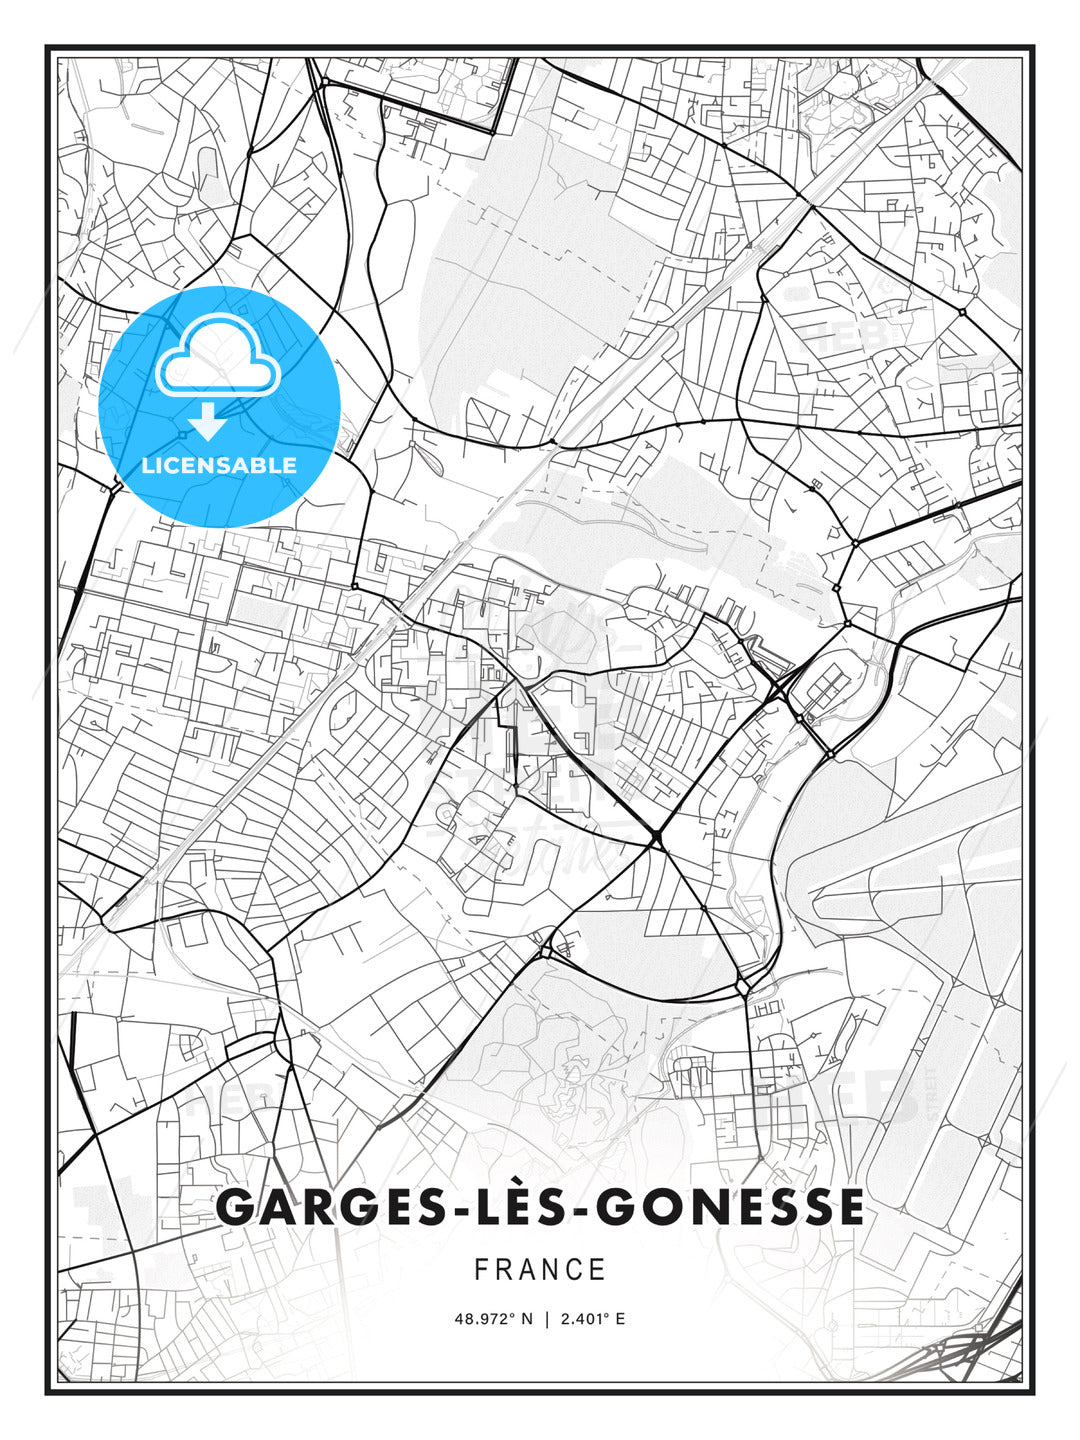 Garges-lès-Gonesse, France, Modern Print Template in Various Formats - HEBSTREITS Sketches